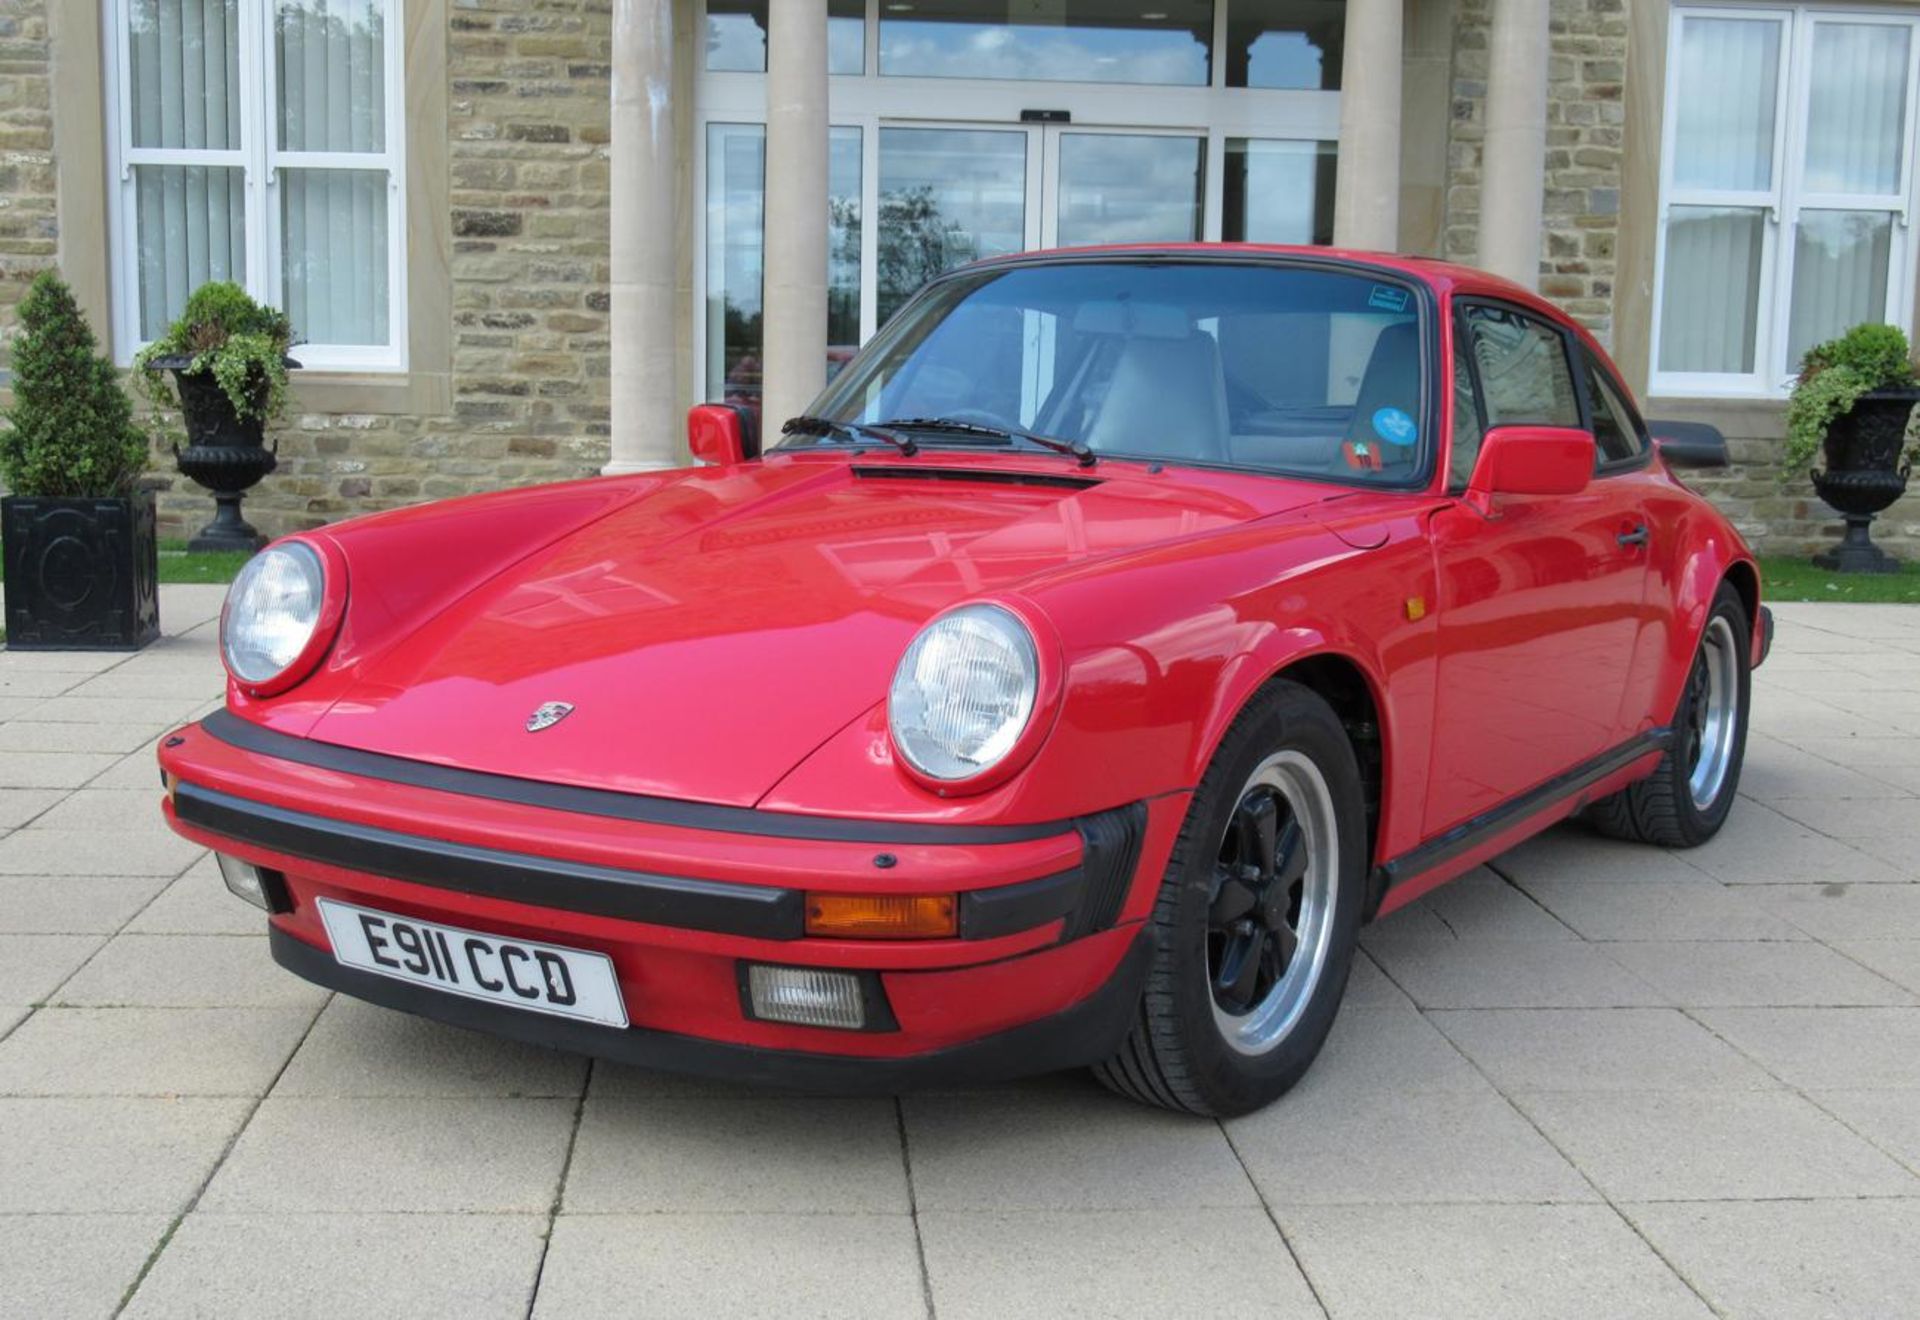 1987 Porsche 911 3.2 Carrera Coupe Registration number: E911 CCD (cherished number) Date of first